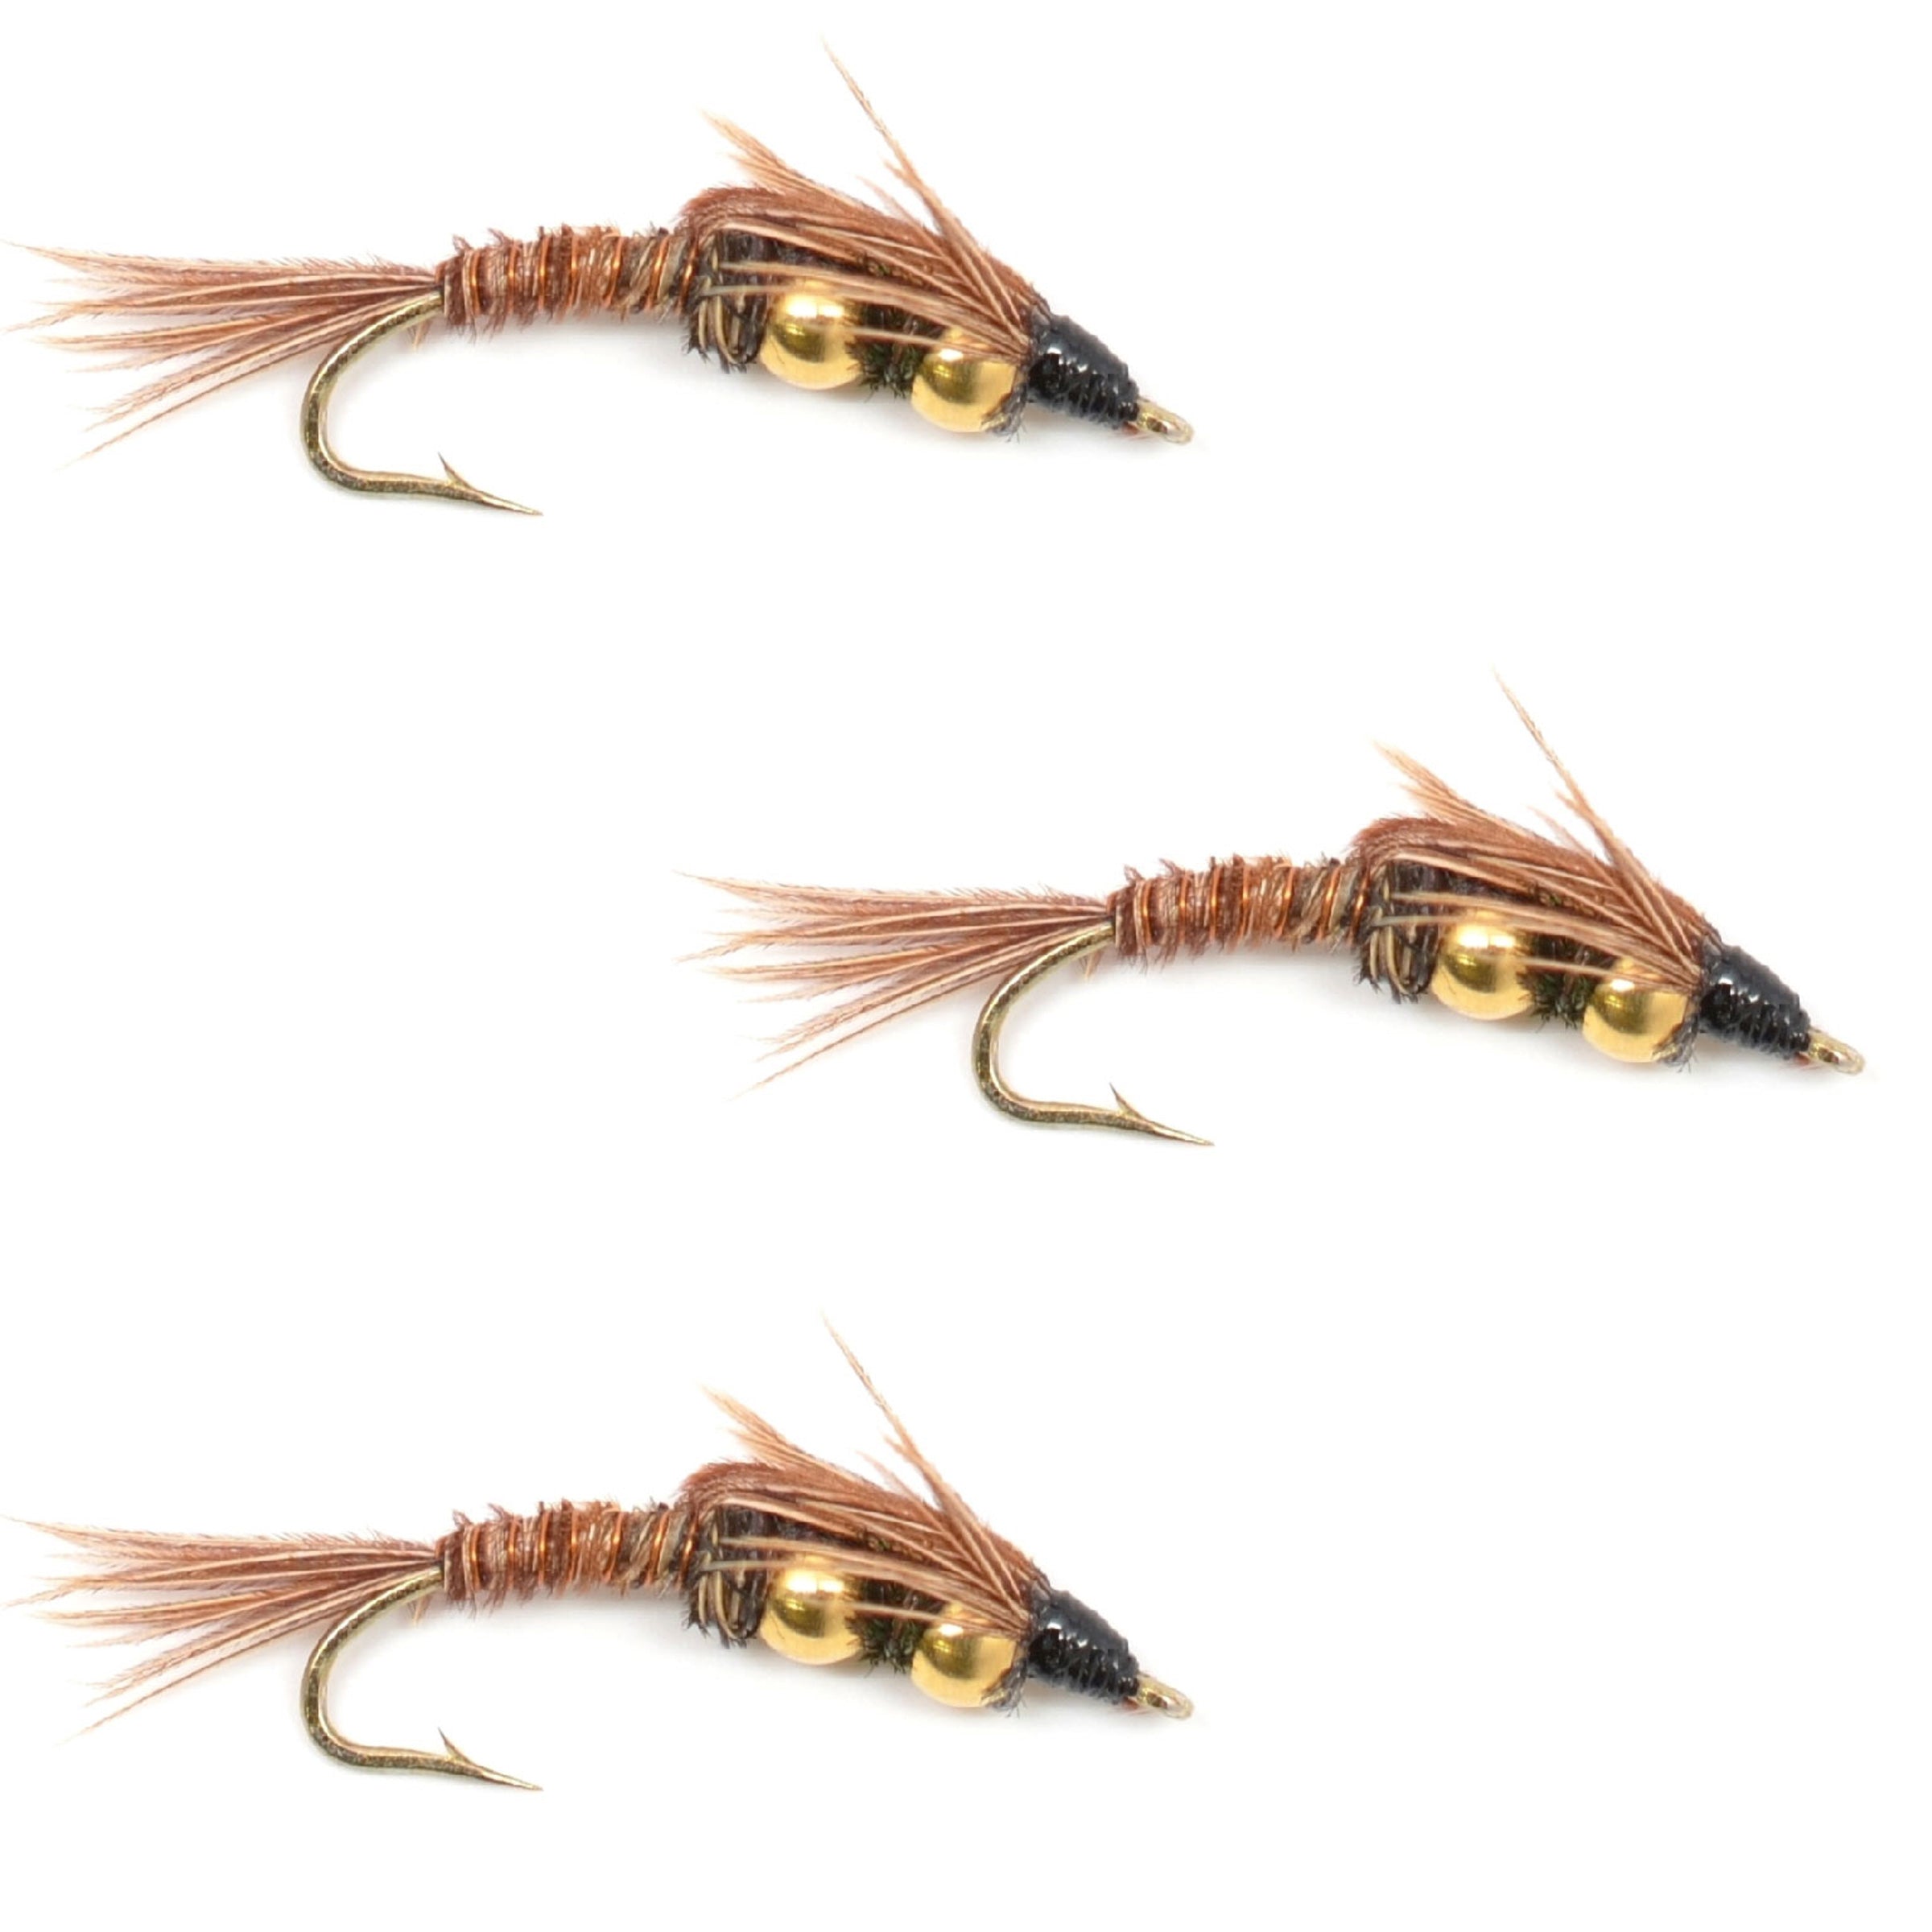 3 Pack Double Bead Pheasant Tail Nymph Fly Fishing Flies Hook Size 8